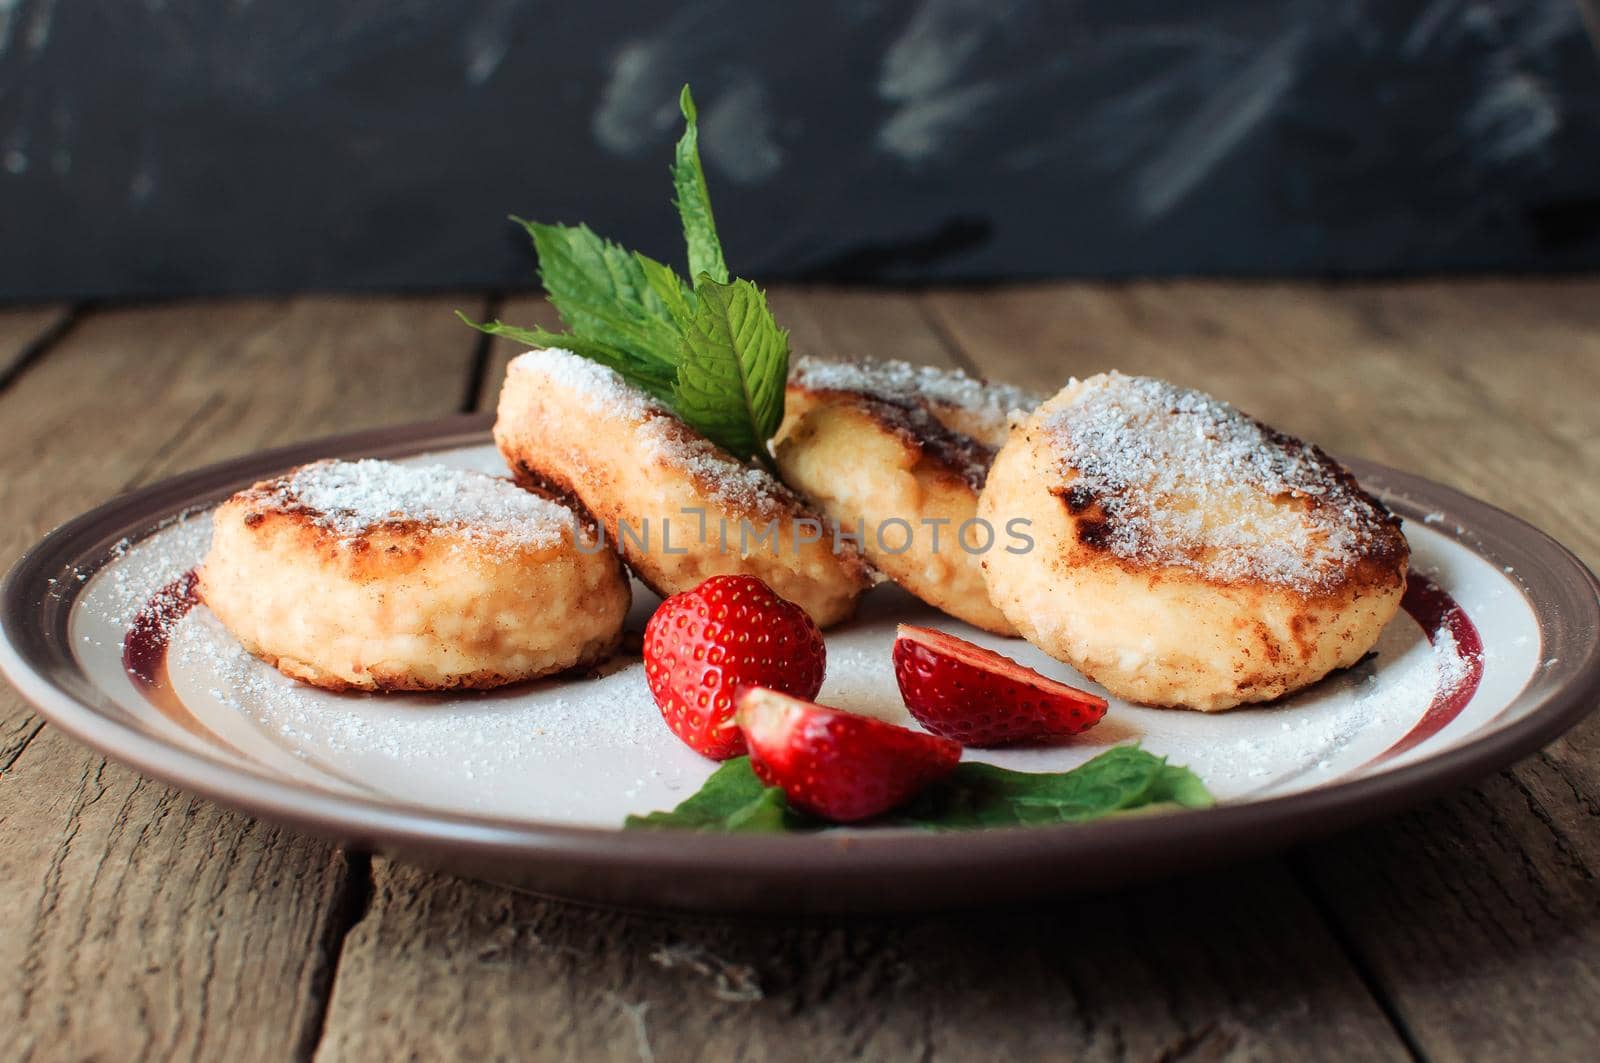 Gourmet breakfast - cottage cheese pancakes, cheesecakes, cottage cheese pancakes with strawberries, mint and powdered sugar in a white plate. Selective focus.